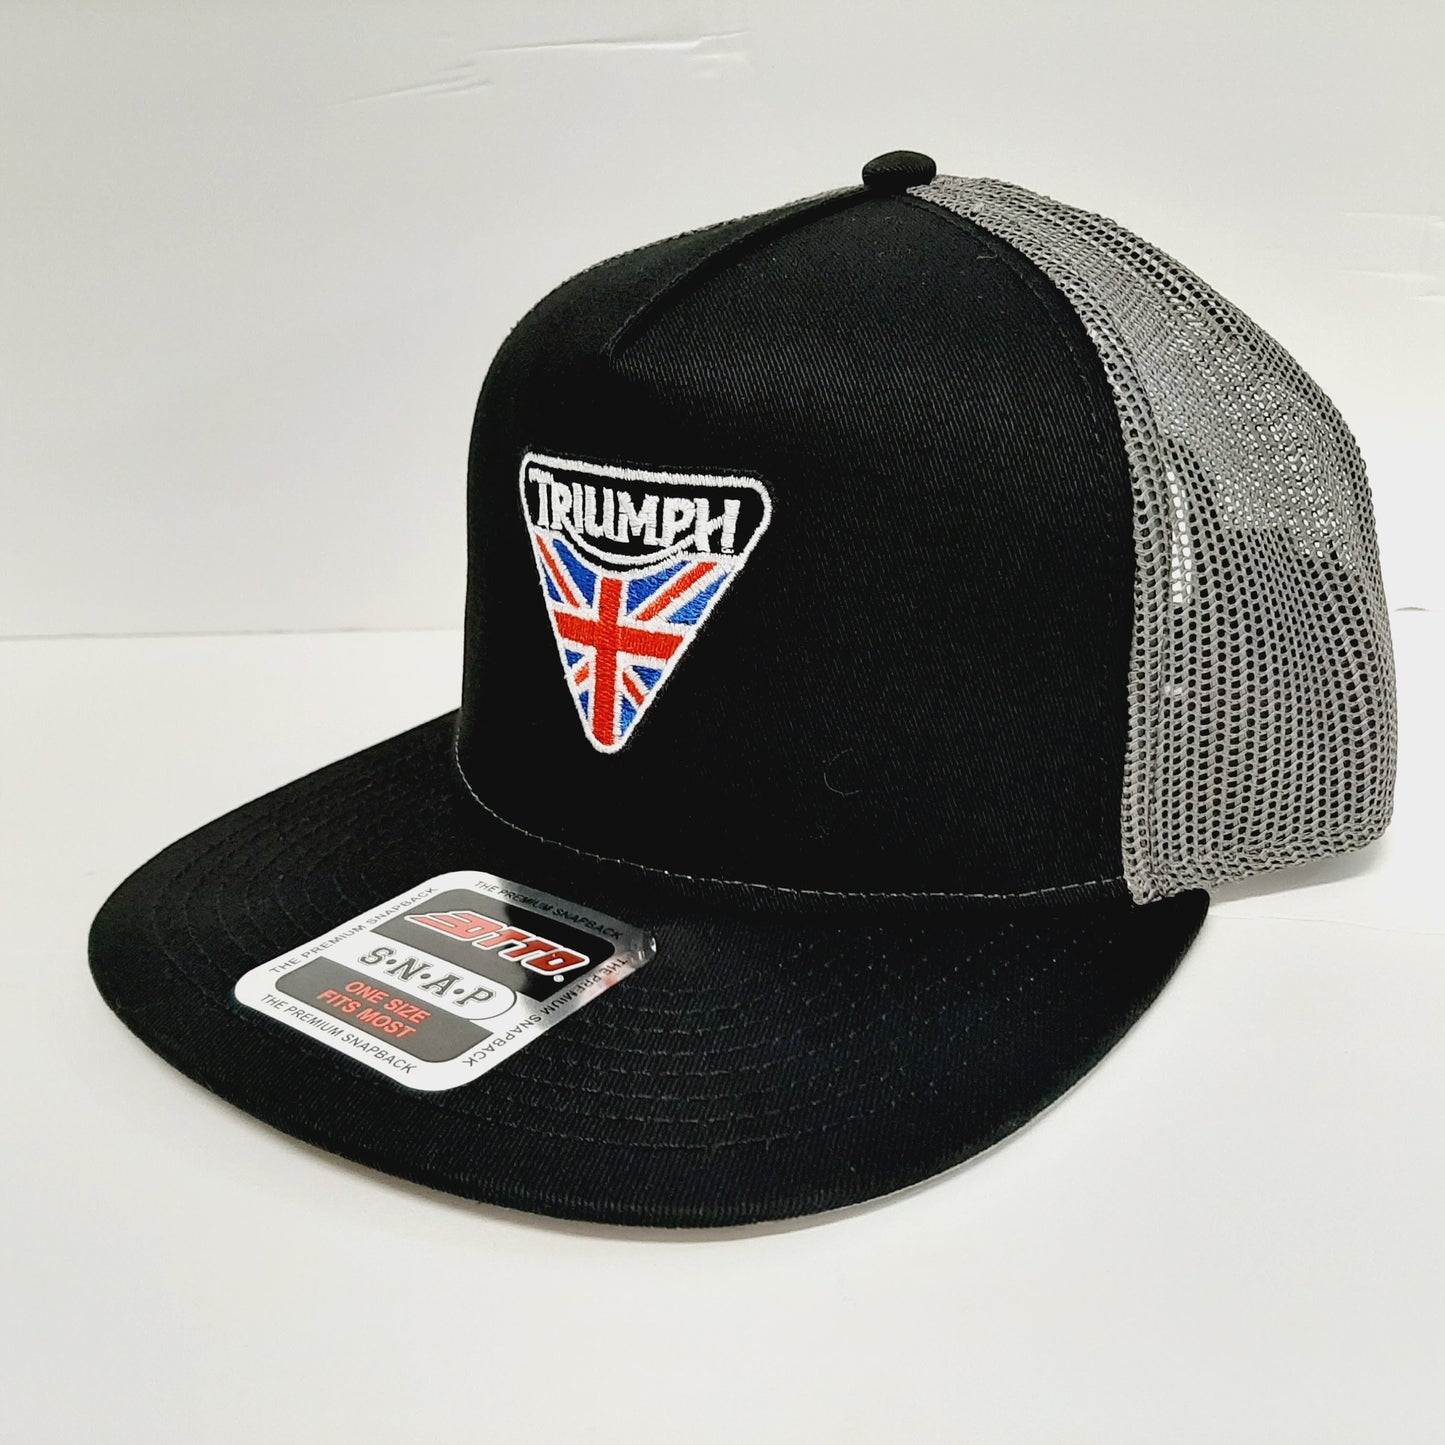 Triumph Motorcycles Otto Flat Bill Trucker Mesh Snapback Cap Hat Black Direct Embroidered